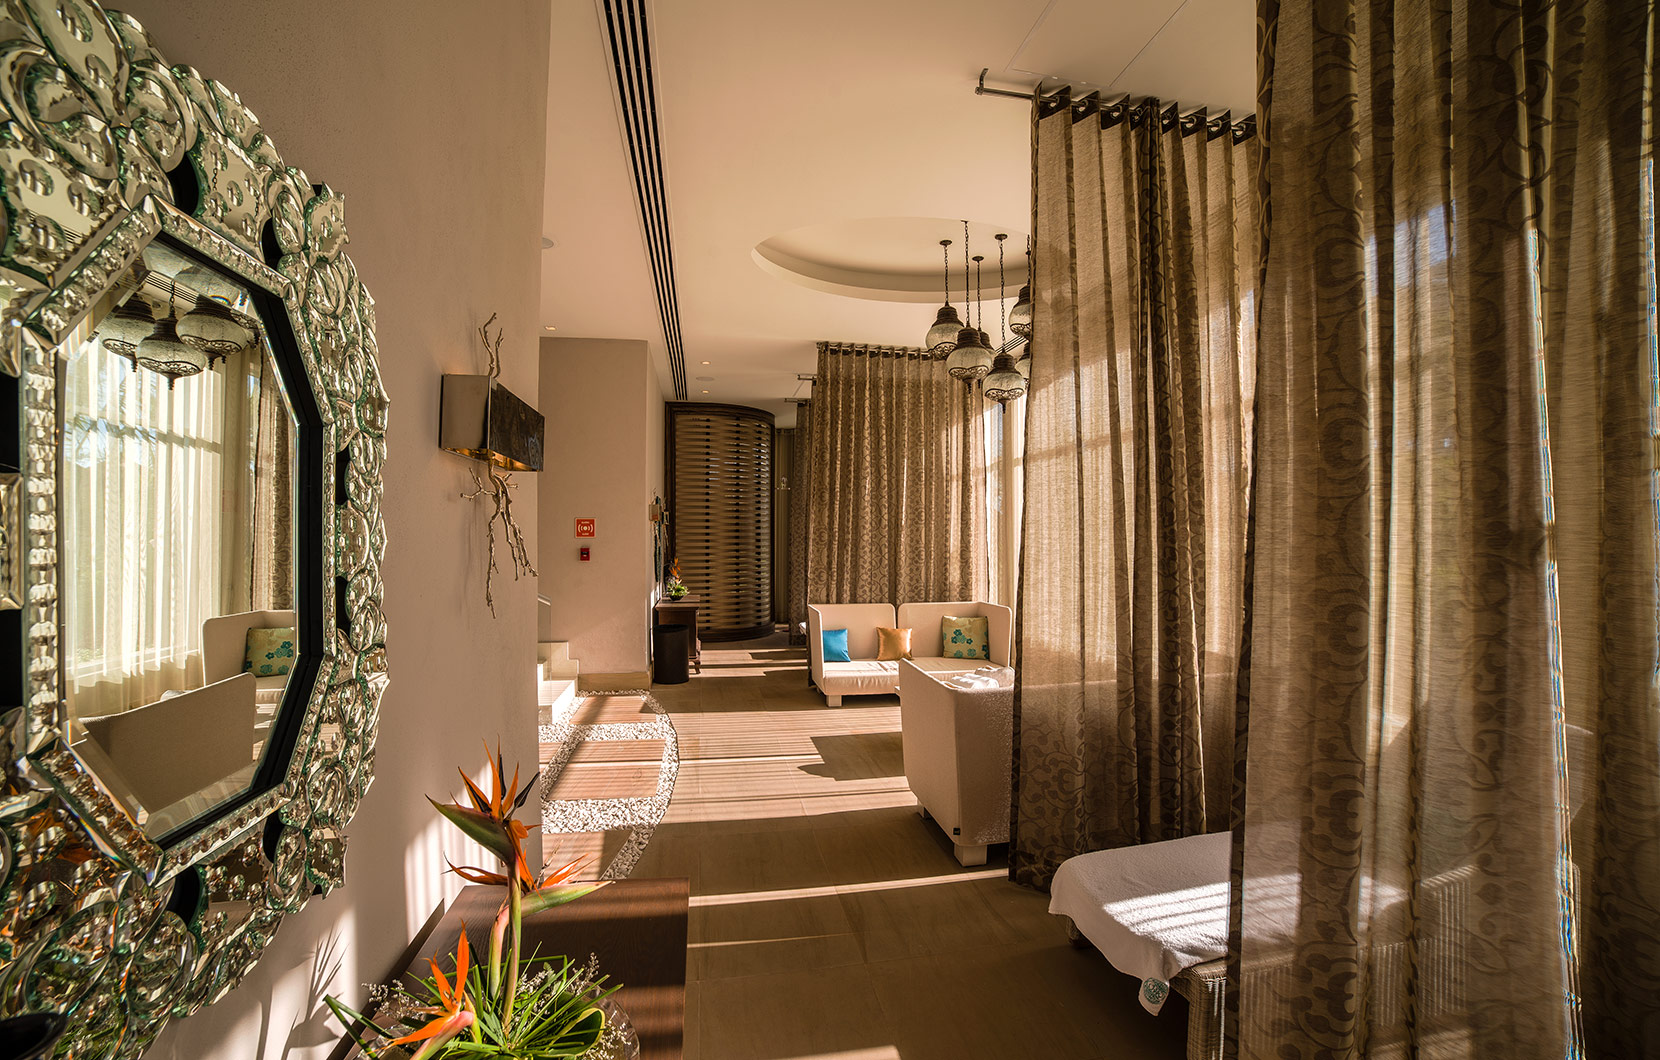 Spatium Nuevo Vallarta is designed as a sanctuary of peace and relaxation.